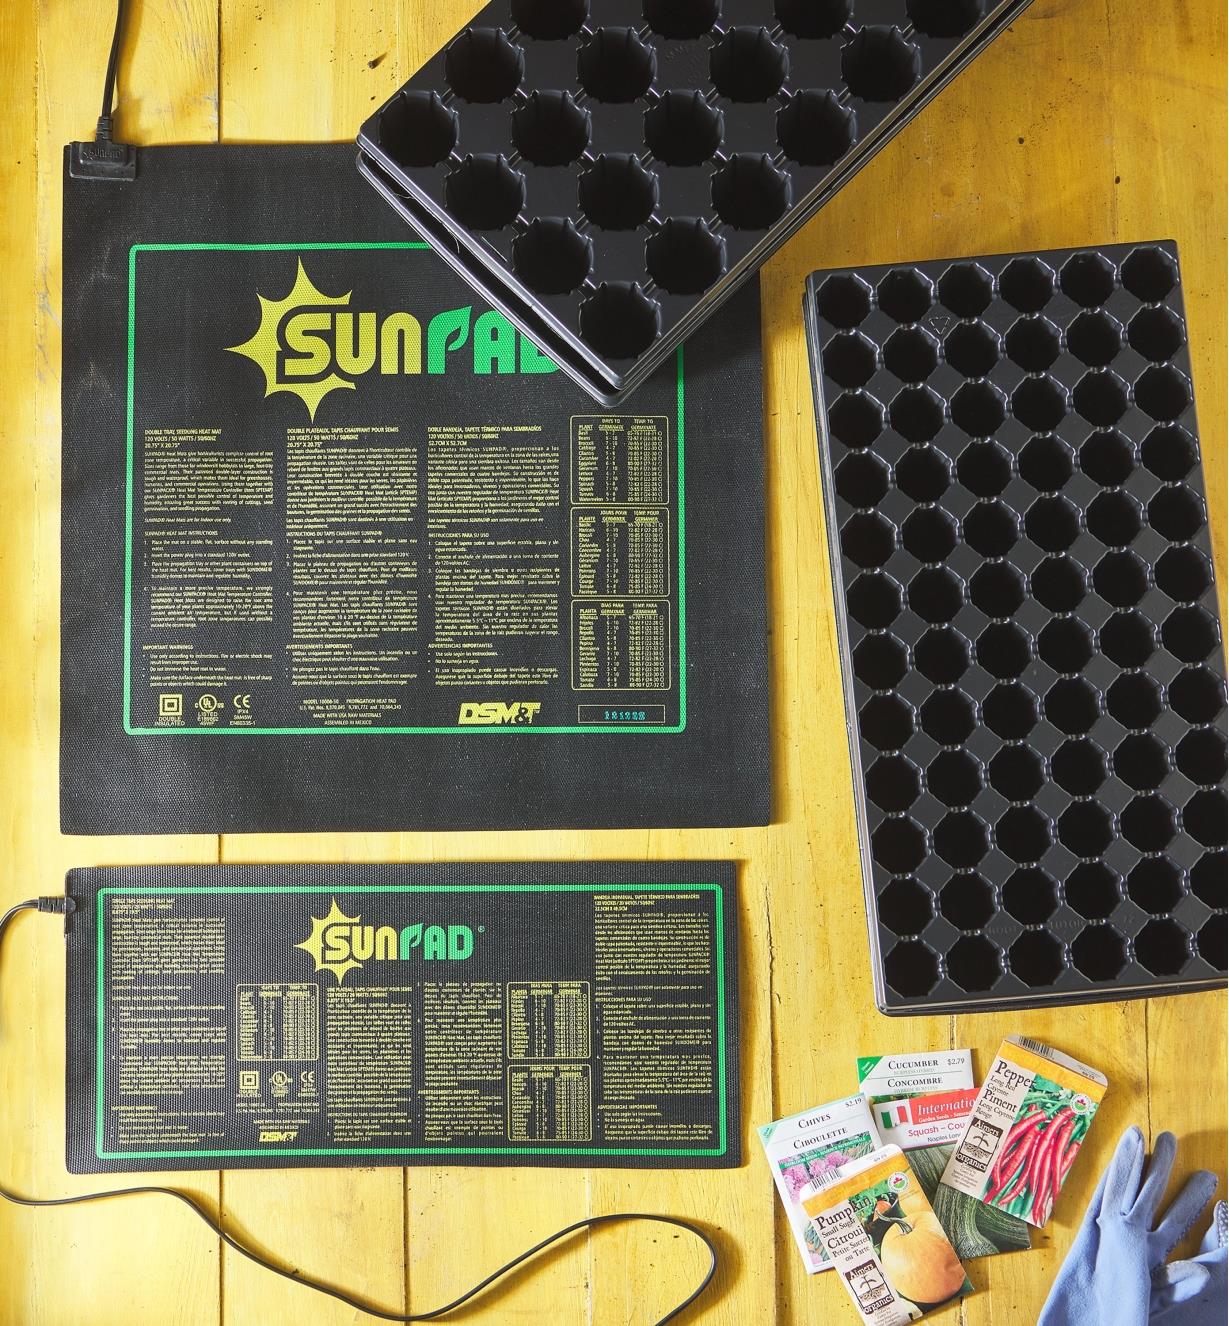 Two sizes of seedling heat mats shown next to empty seed trays, seed packets and gardening gloves